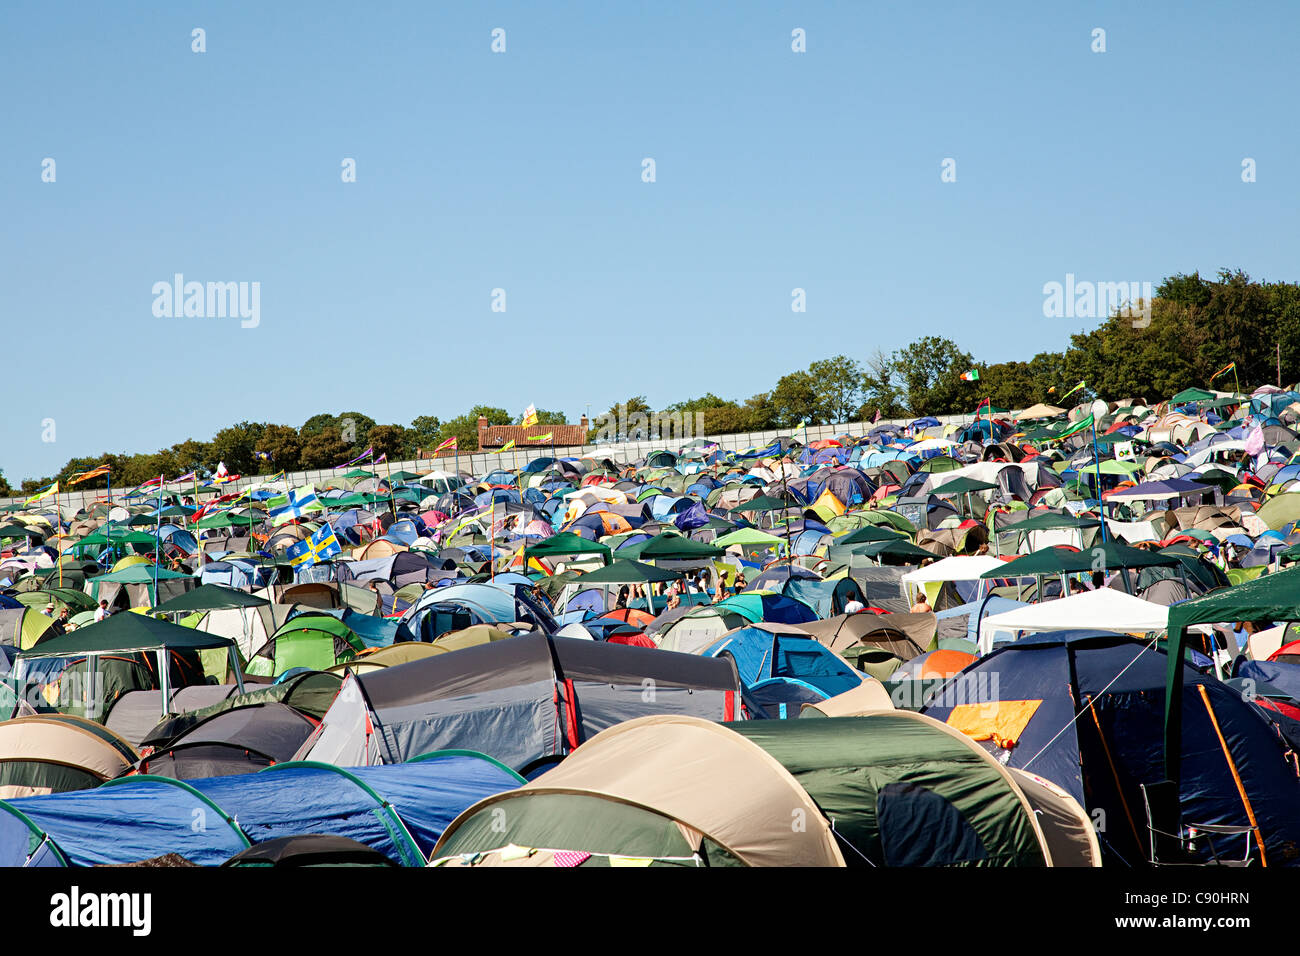 Tents at summer music festival Stock Photo